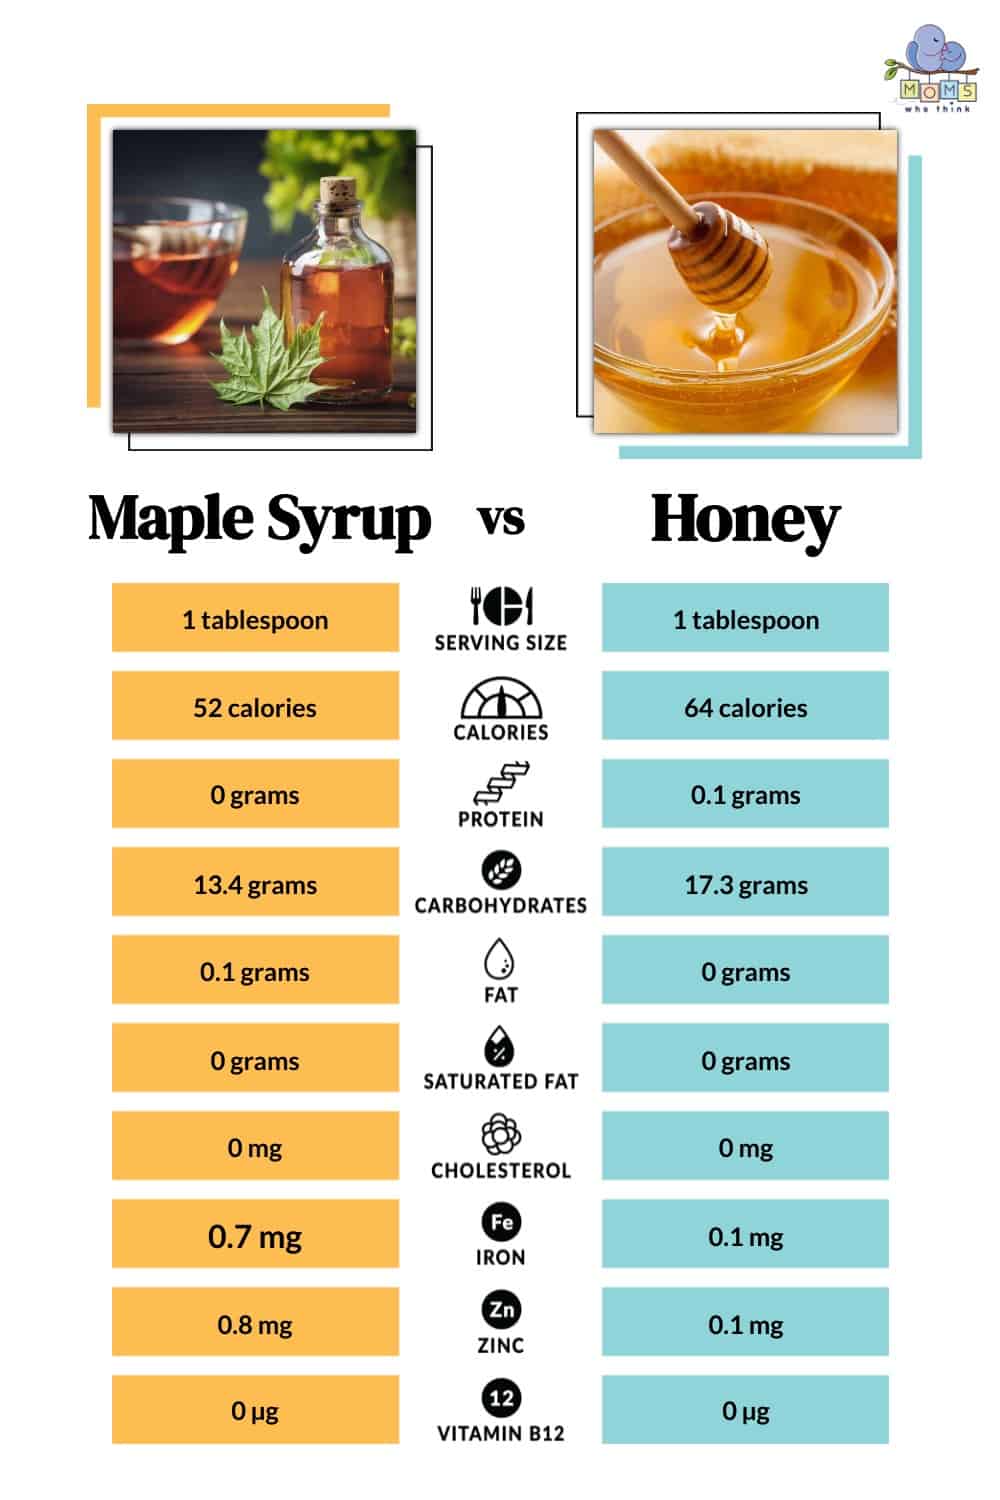 Maple Syrup vs Honey Nutritional Facts